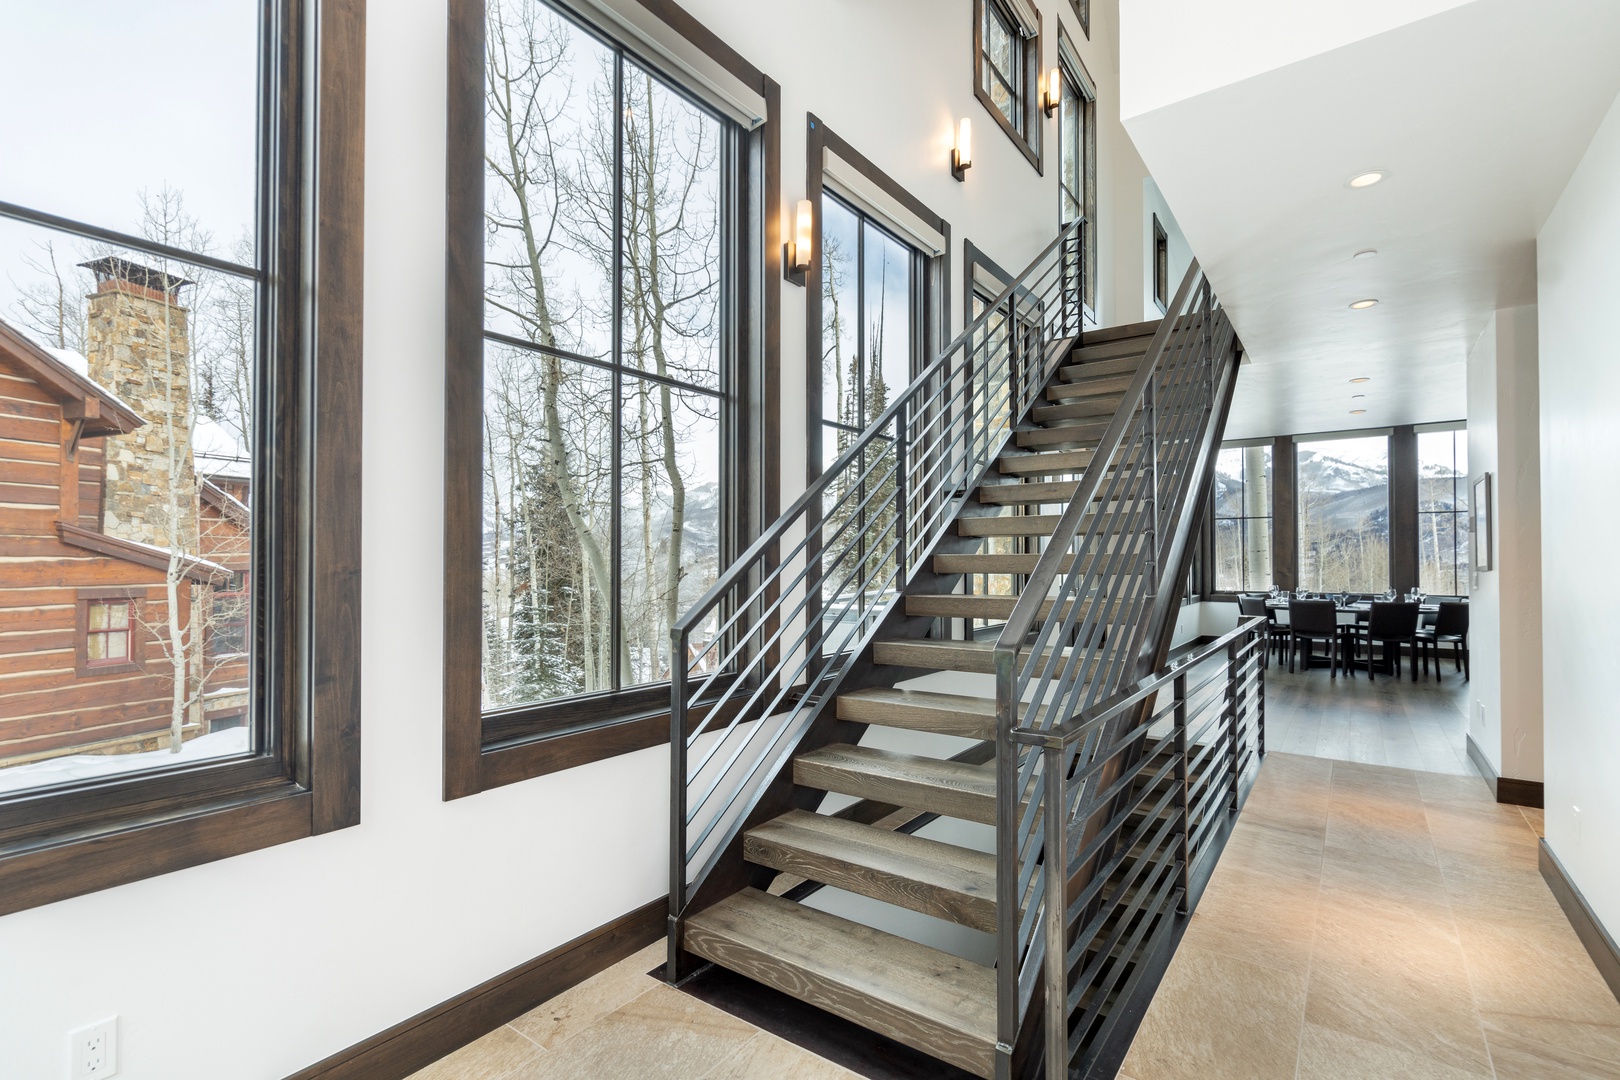 Amazing architectural details like this staircase highlight this home